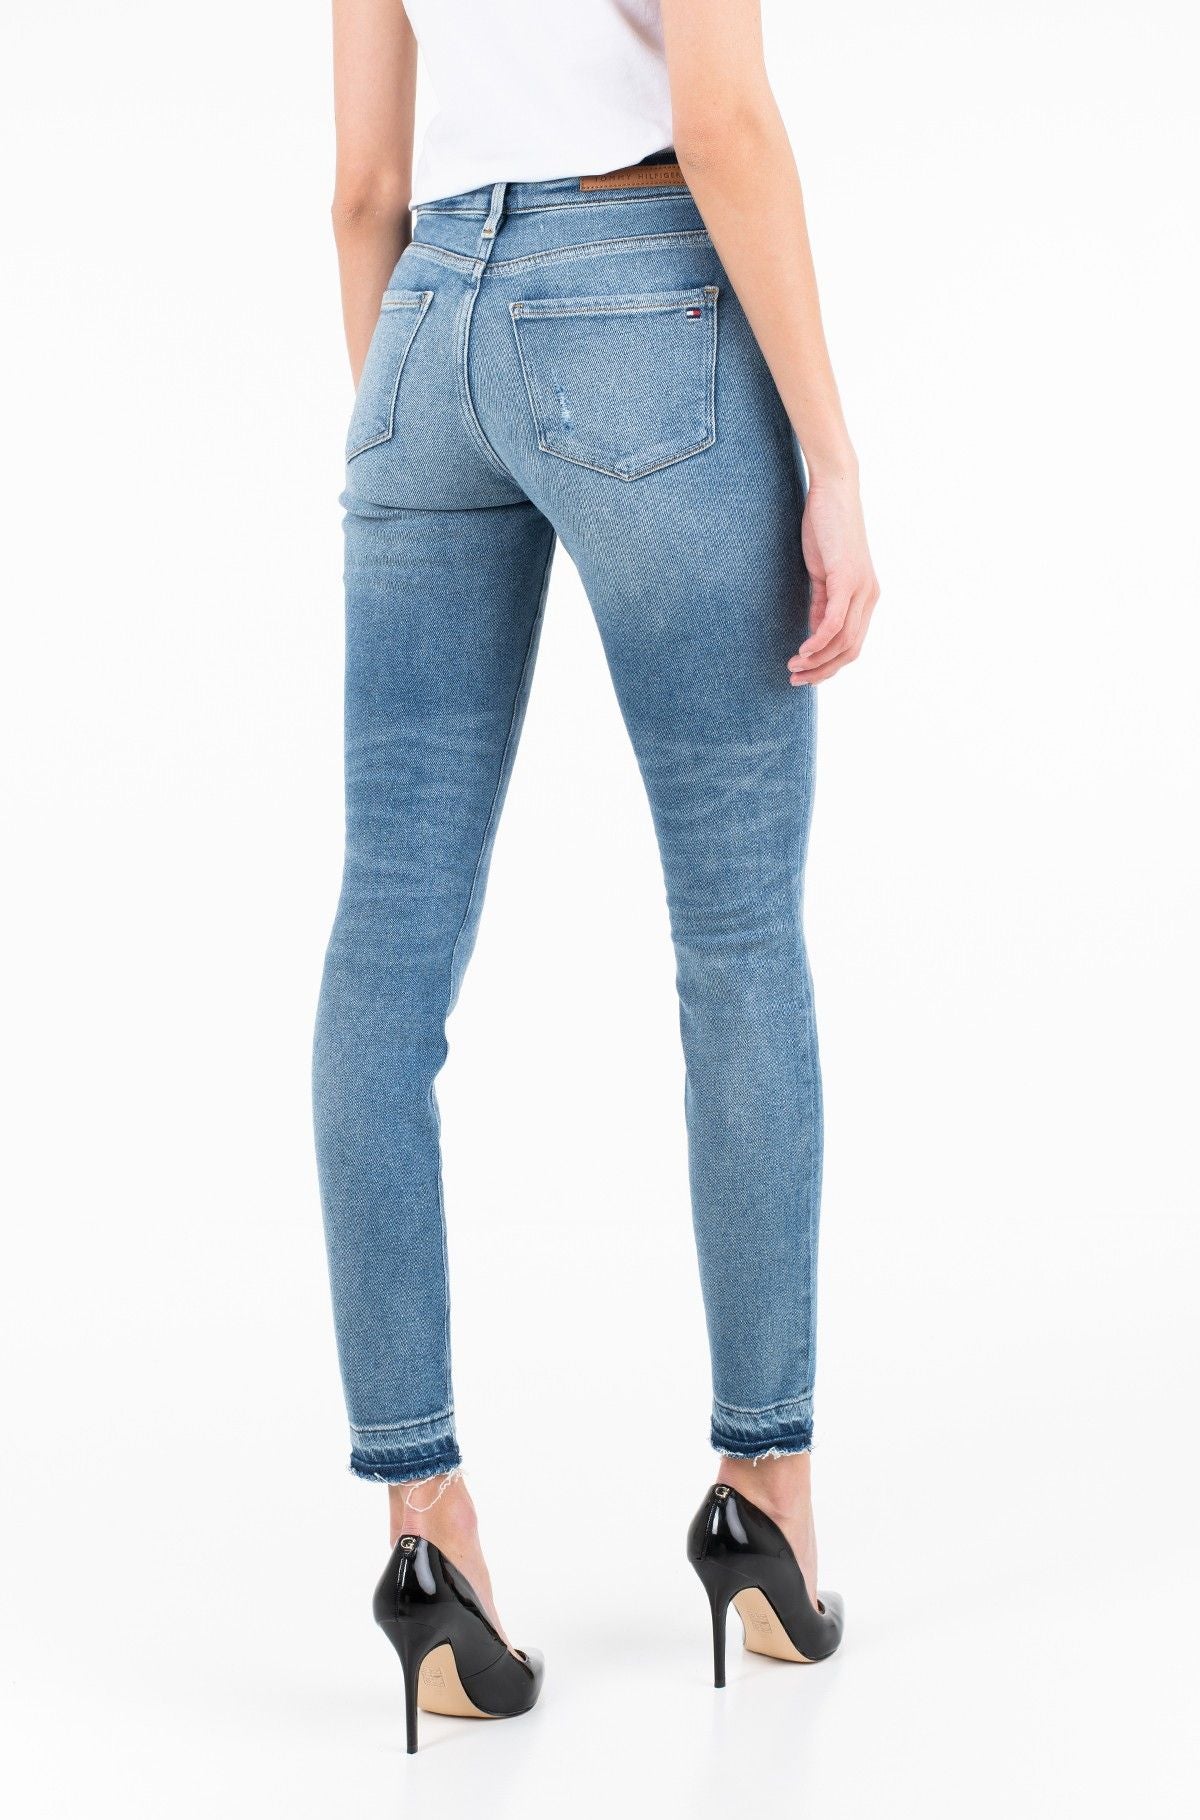 Chic Ankle Length Jeggings in Blue